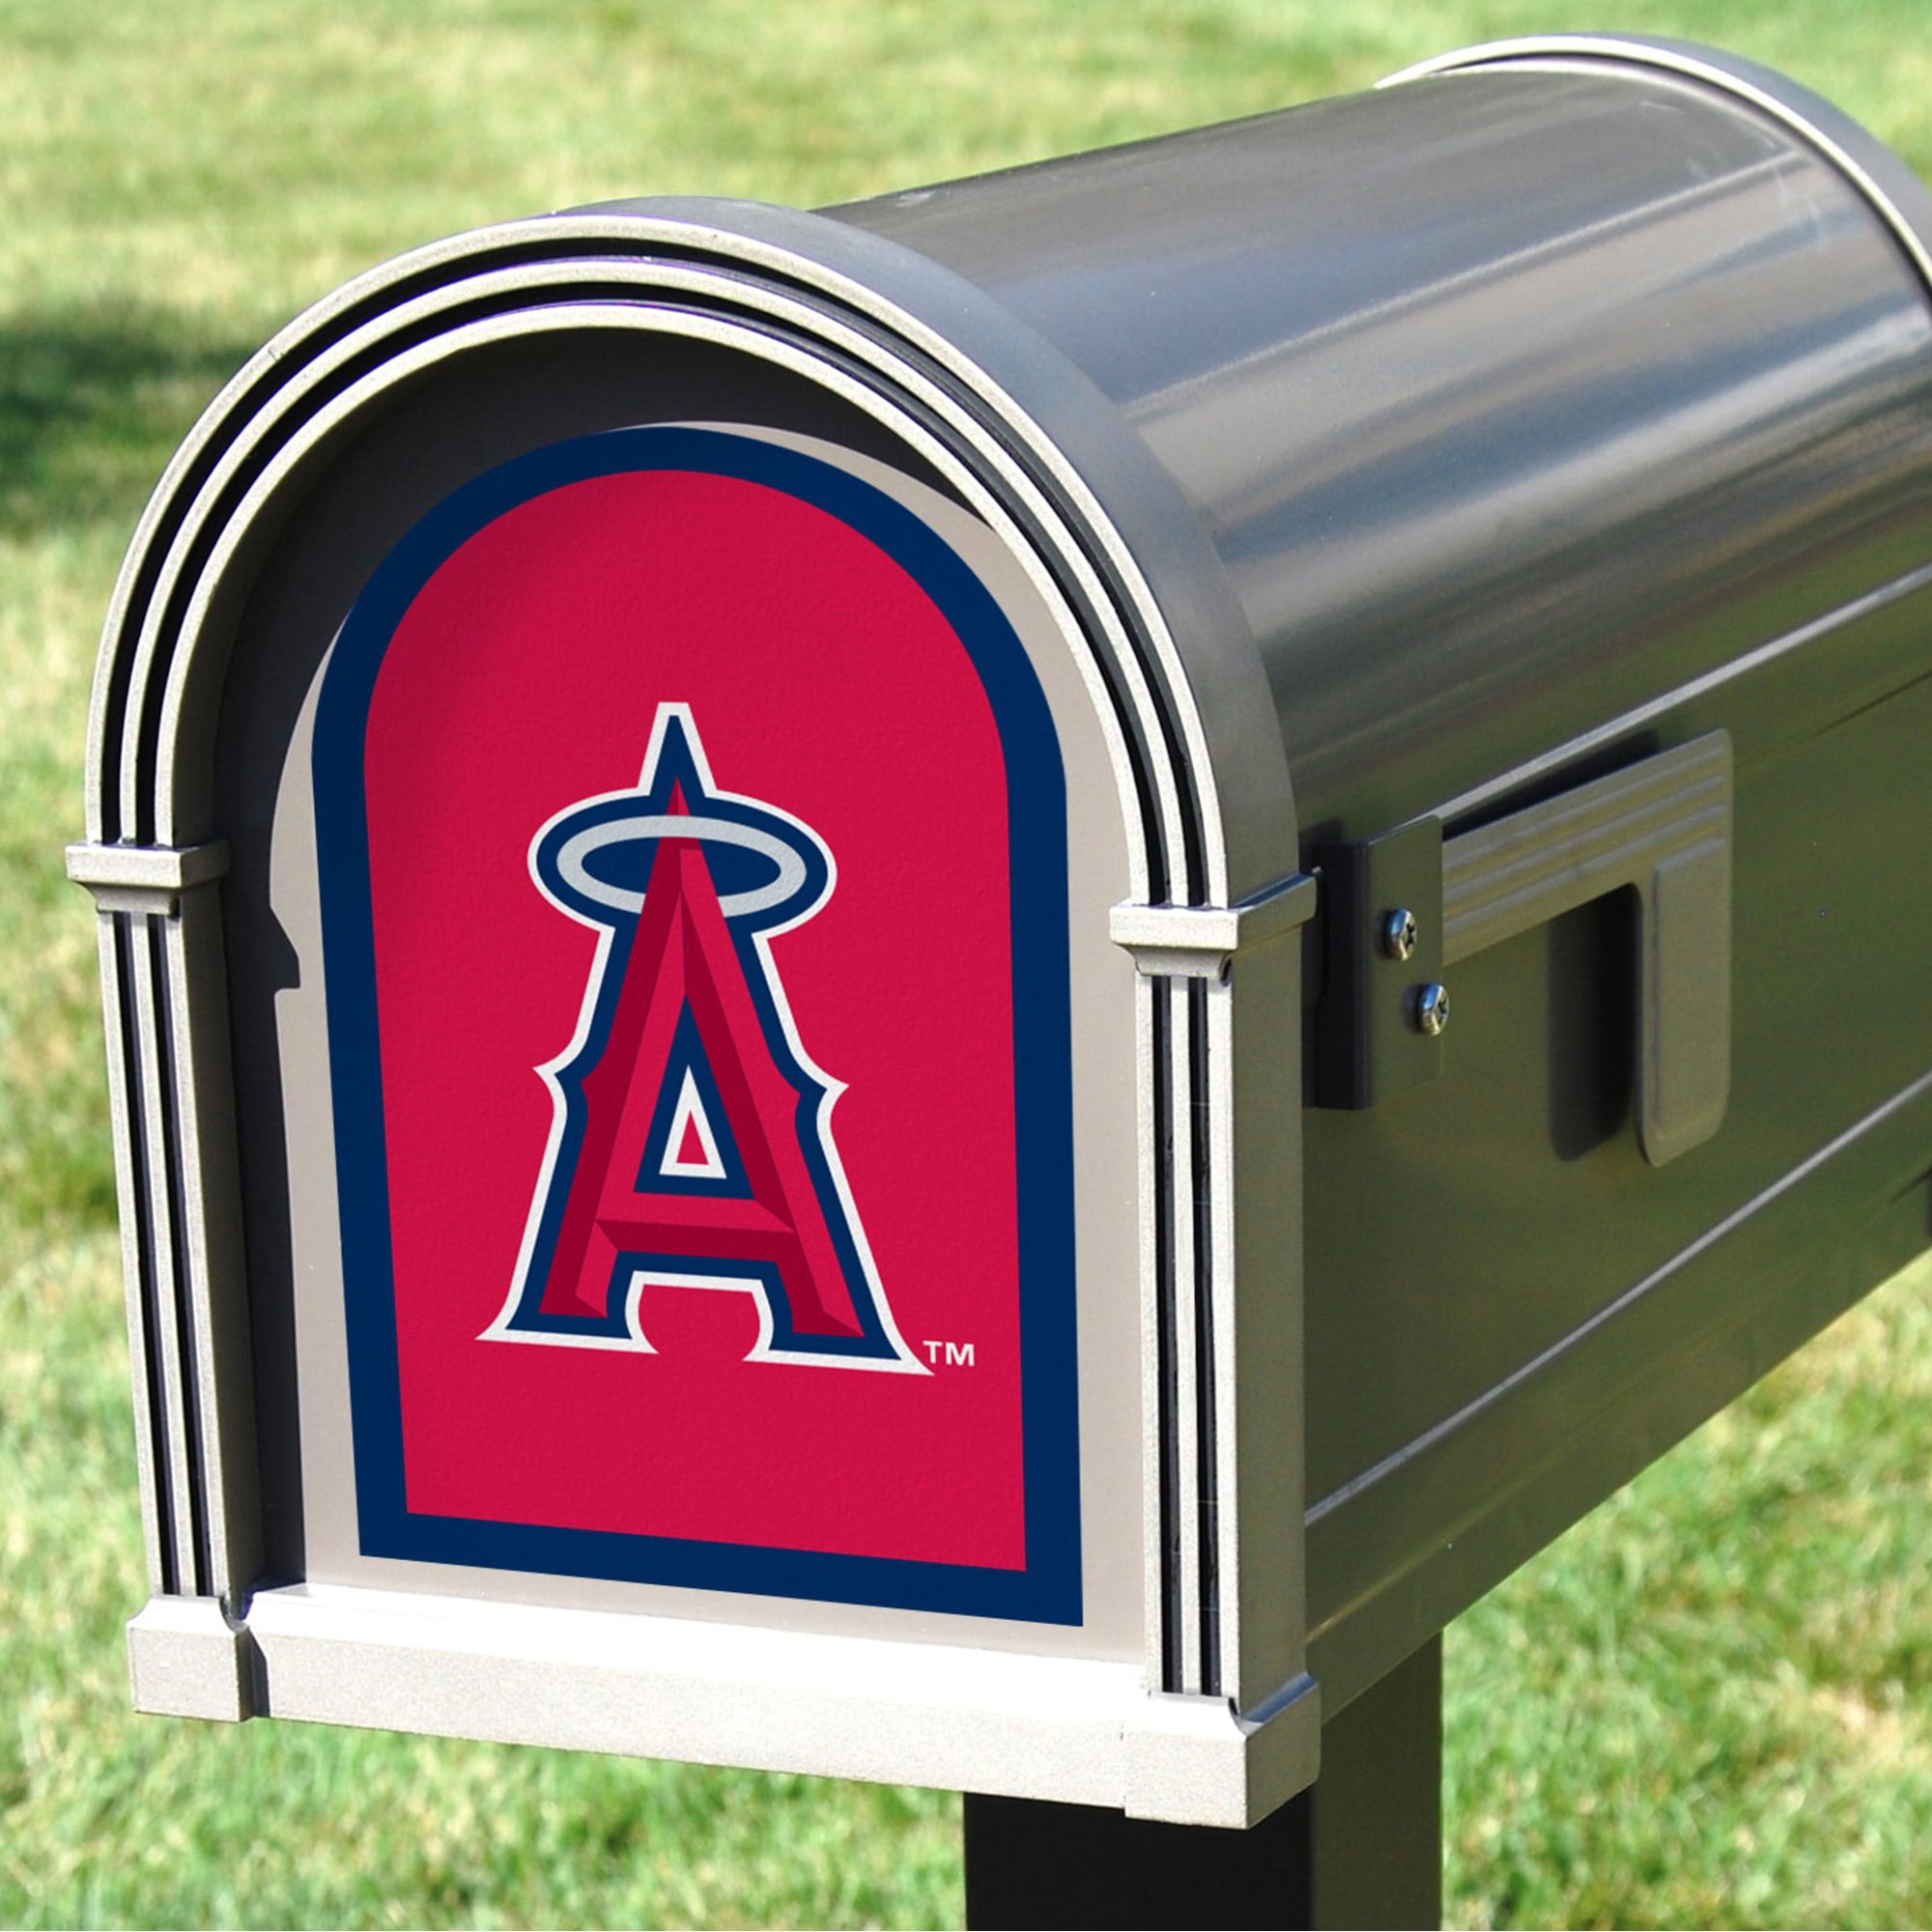 LA Angels: Mailbox Logo - Officially Licensed MLB Outdoor Graphic 5.0"W x 8.0"H by Fathead | Wood/Aluminum